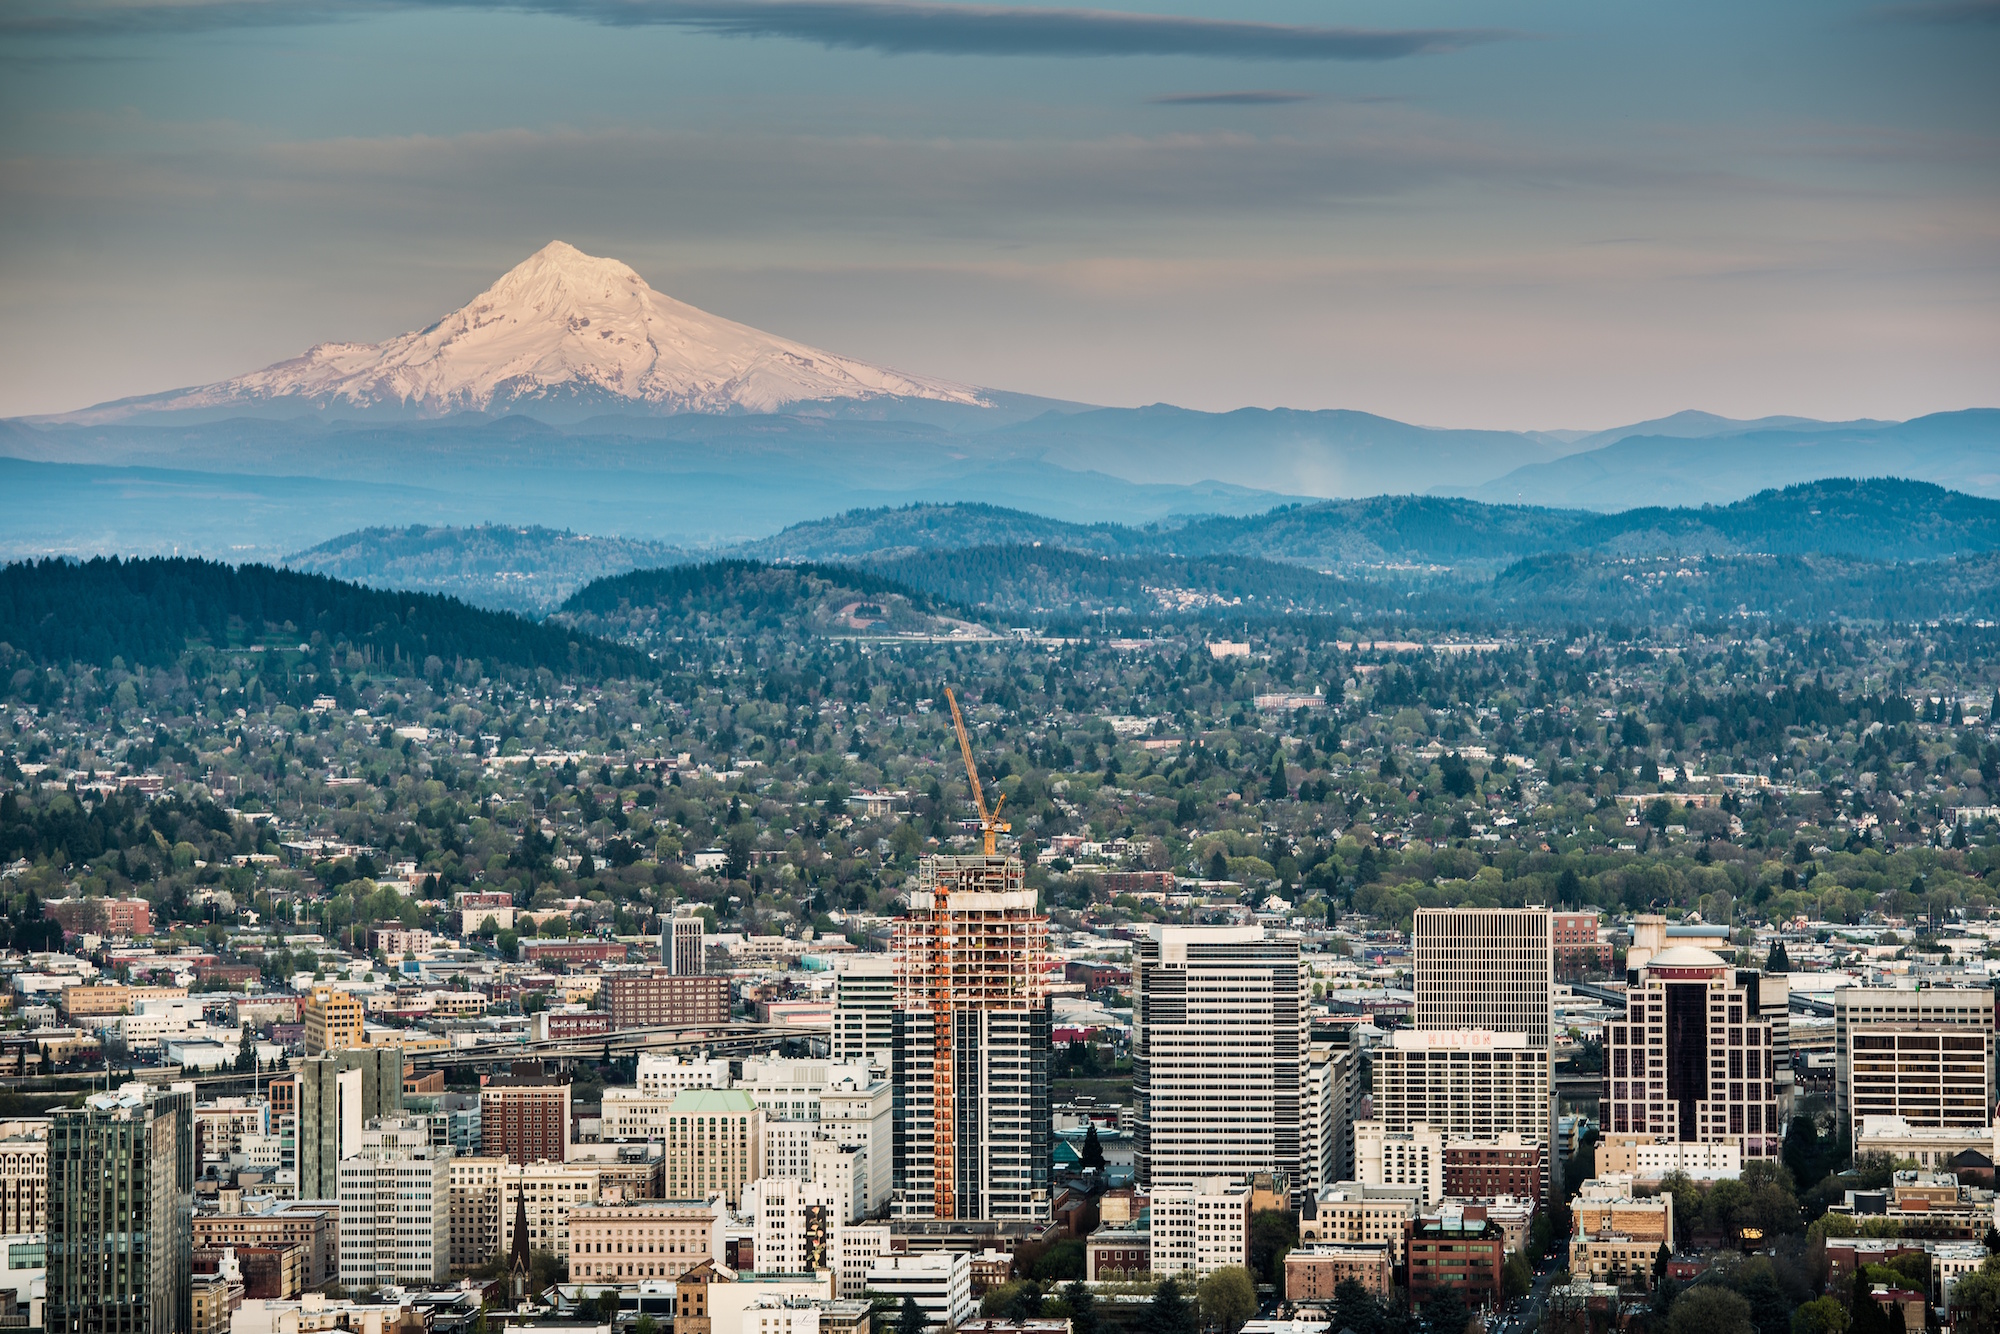 Overview of Downtown Portland with Mt. Hood in the backdrop